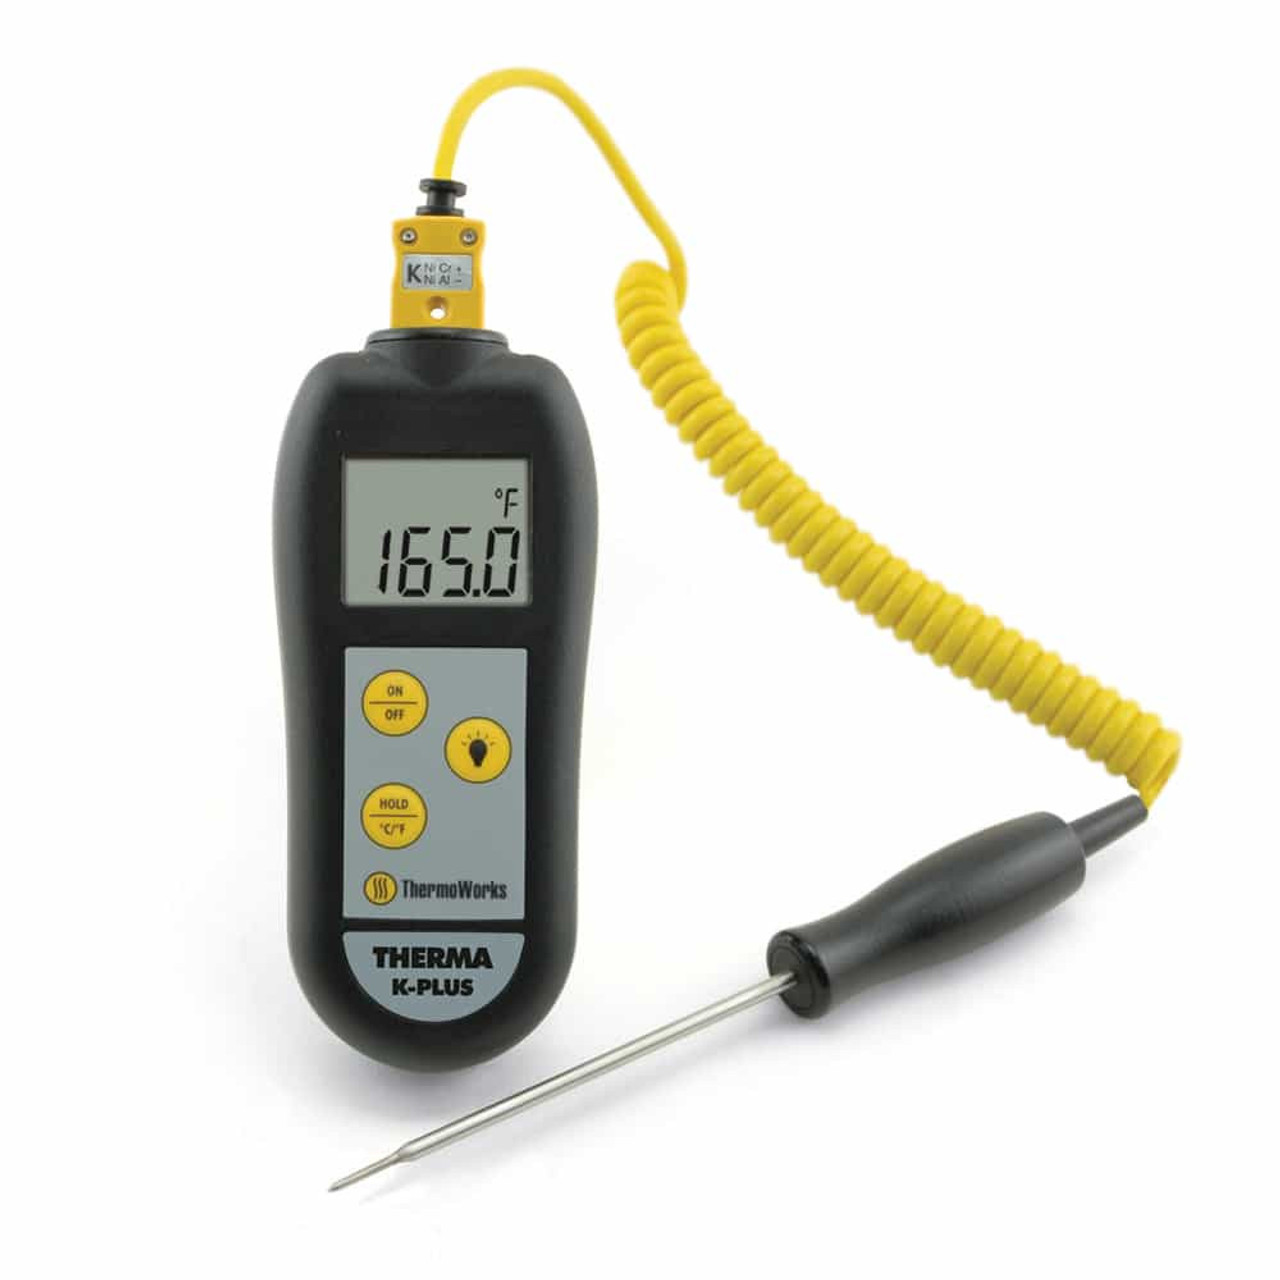 DASH™ Thermometers - ThermoWorks